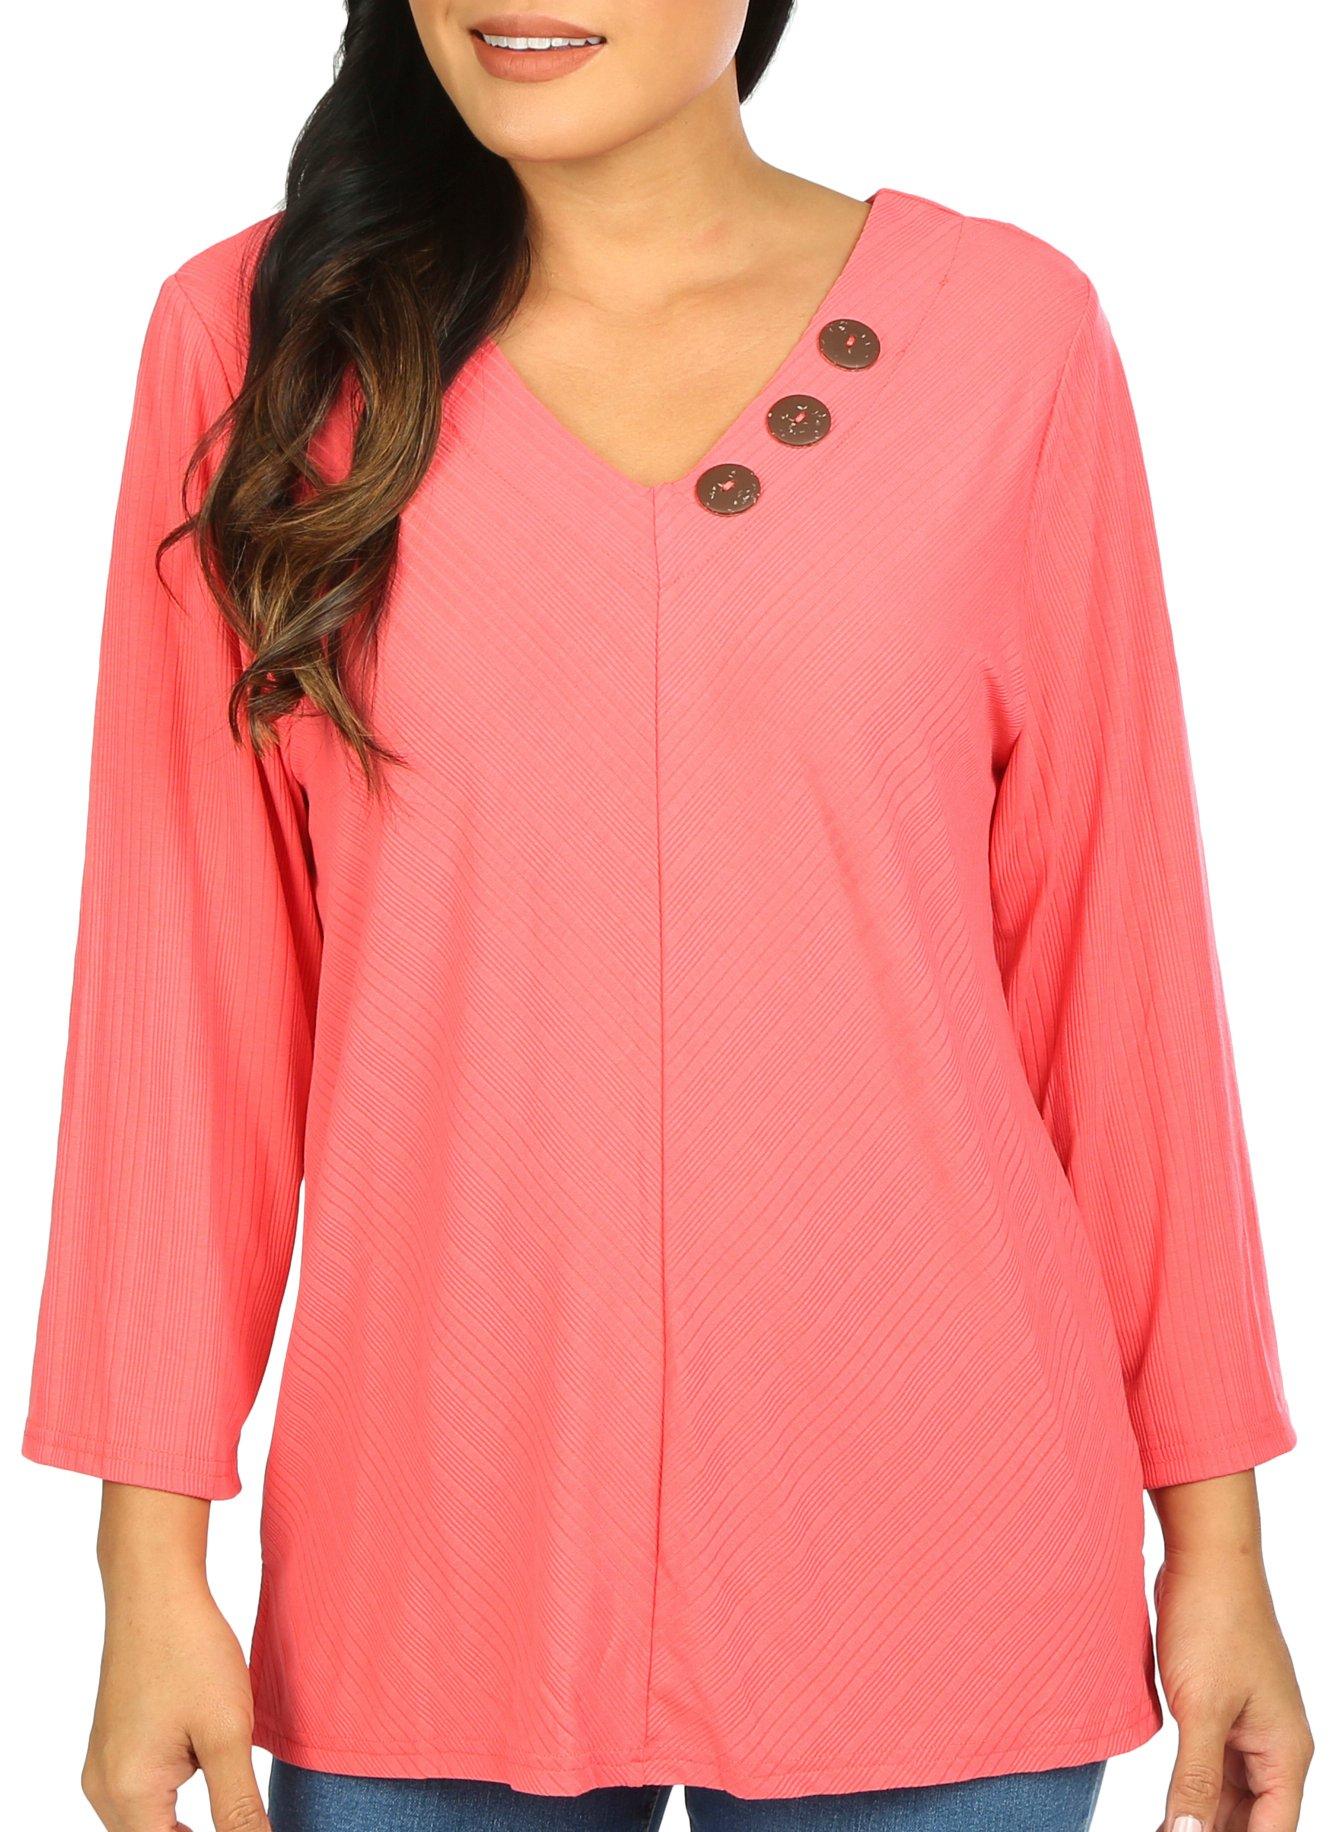 Juniper + Lime Womens Coconut Buttons 3/4 Sleeve Top